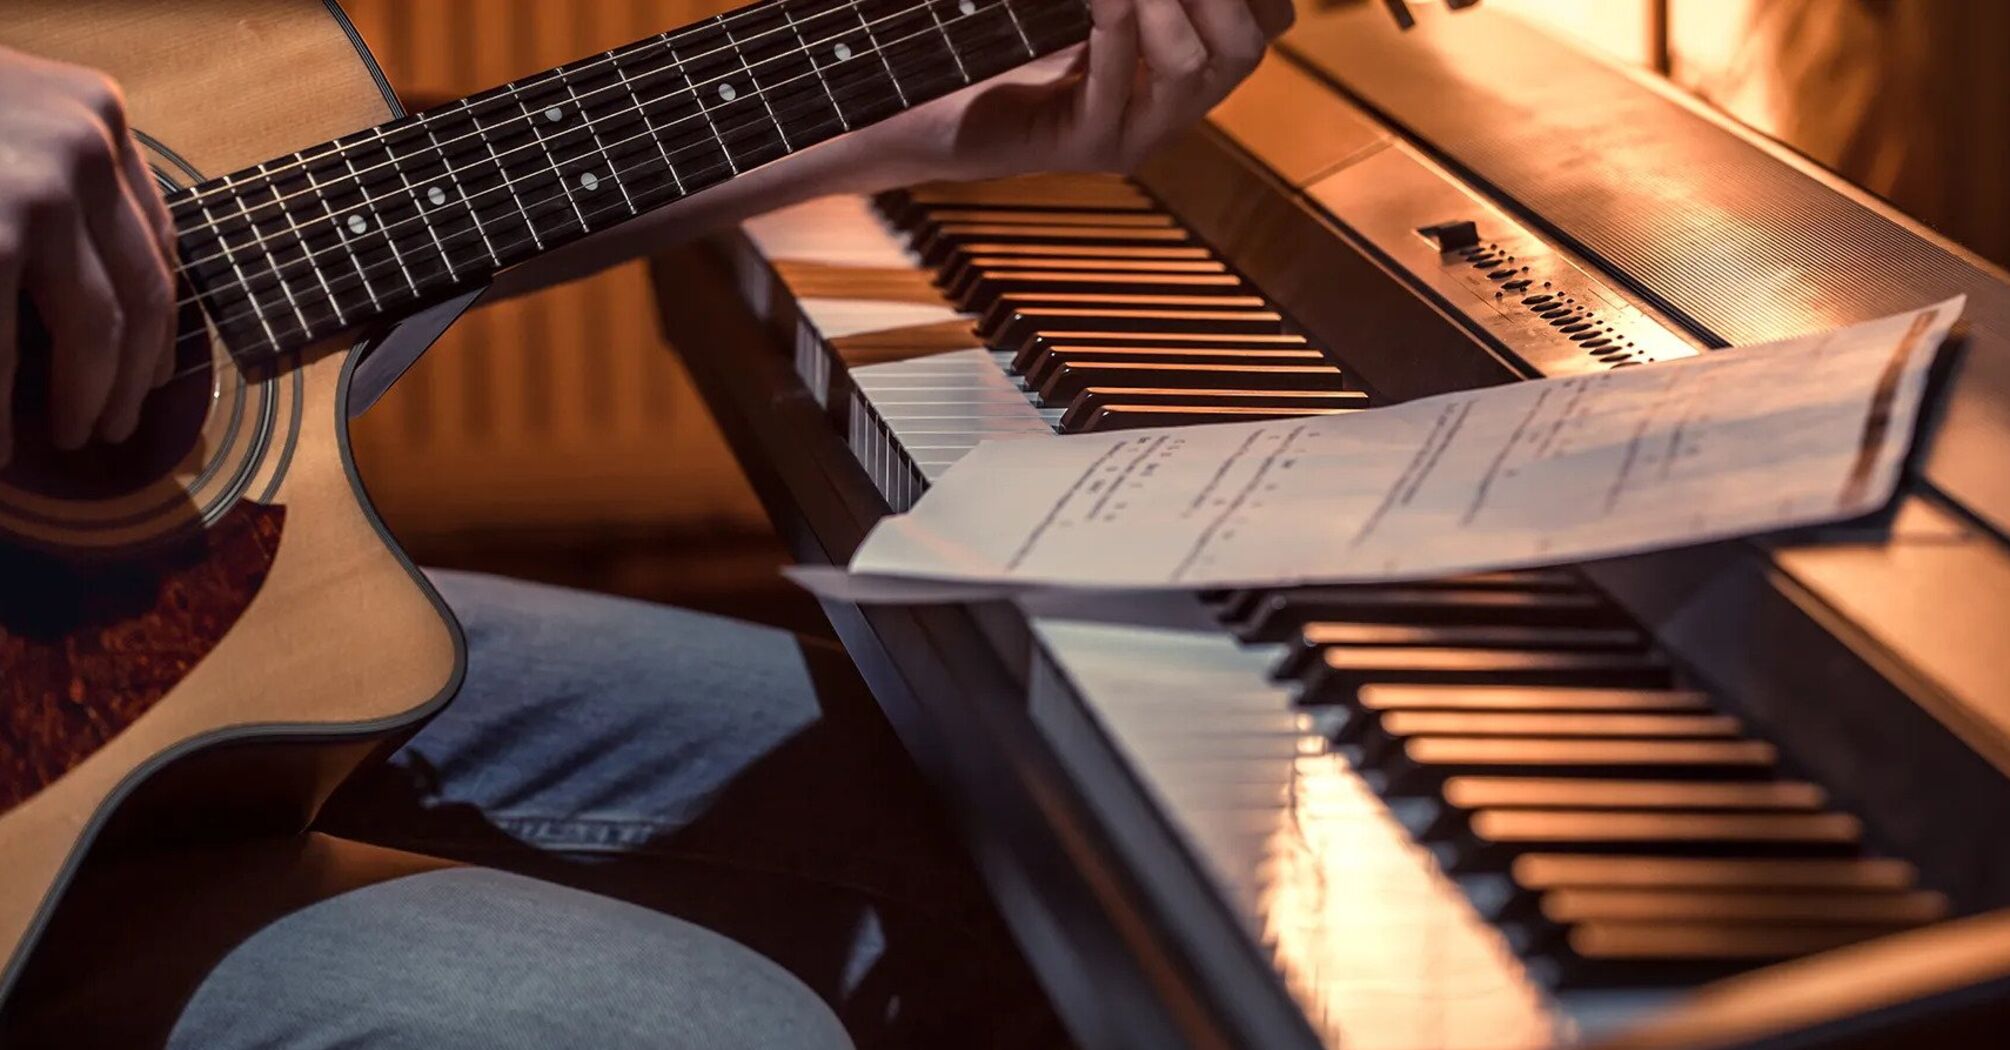 Features of playing the guitar and piano